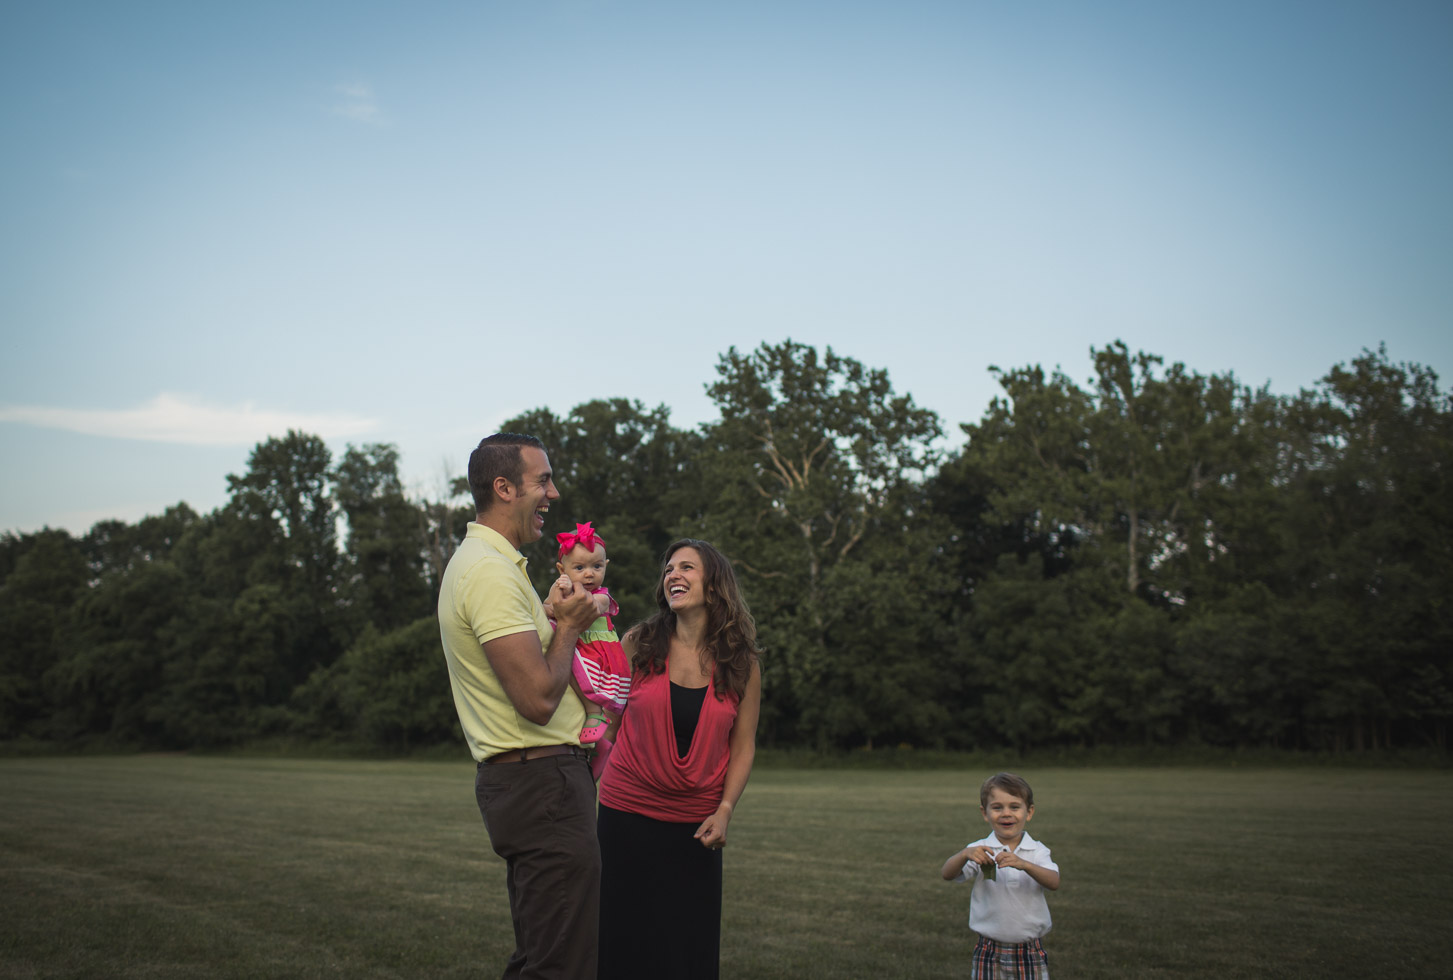 Family laughing together in wide open field, connection, embrace